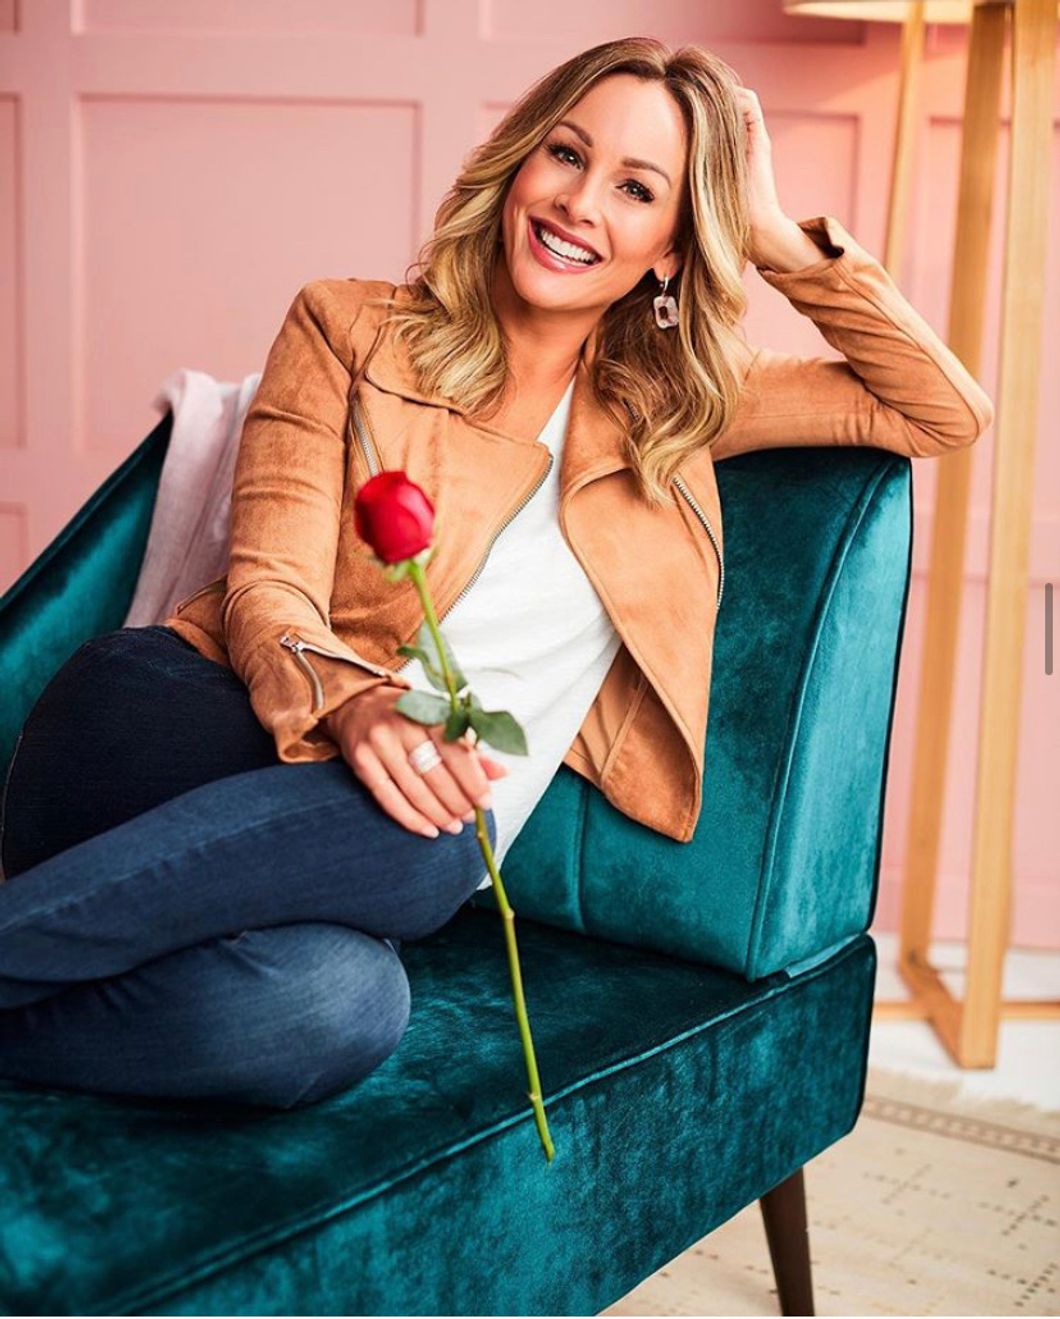 5 Reasons Why Clare Crawley Is The Worst Contestant In The History Of 'The Bachelorette,' According To A Long-Time Member of Bachelor Nation